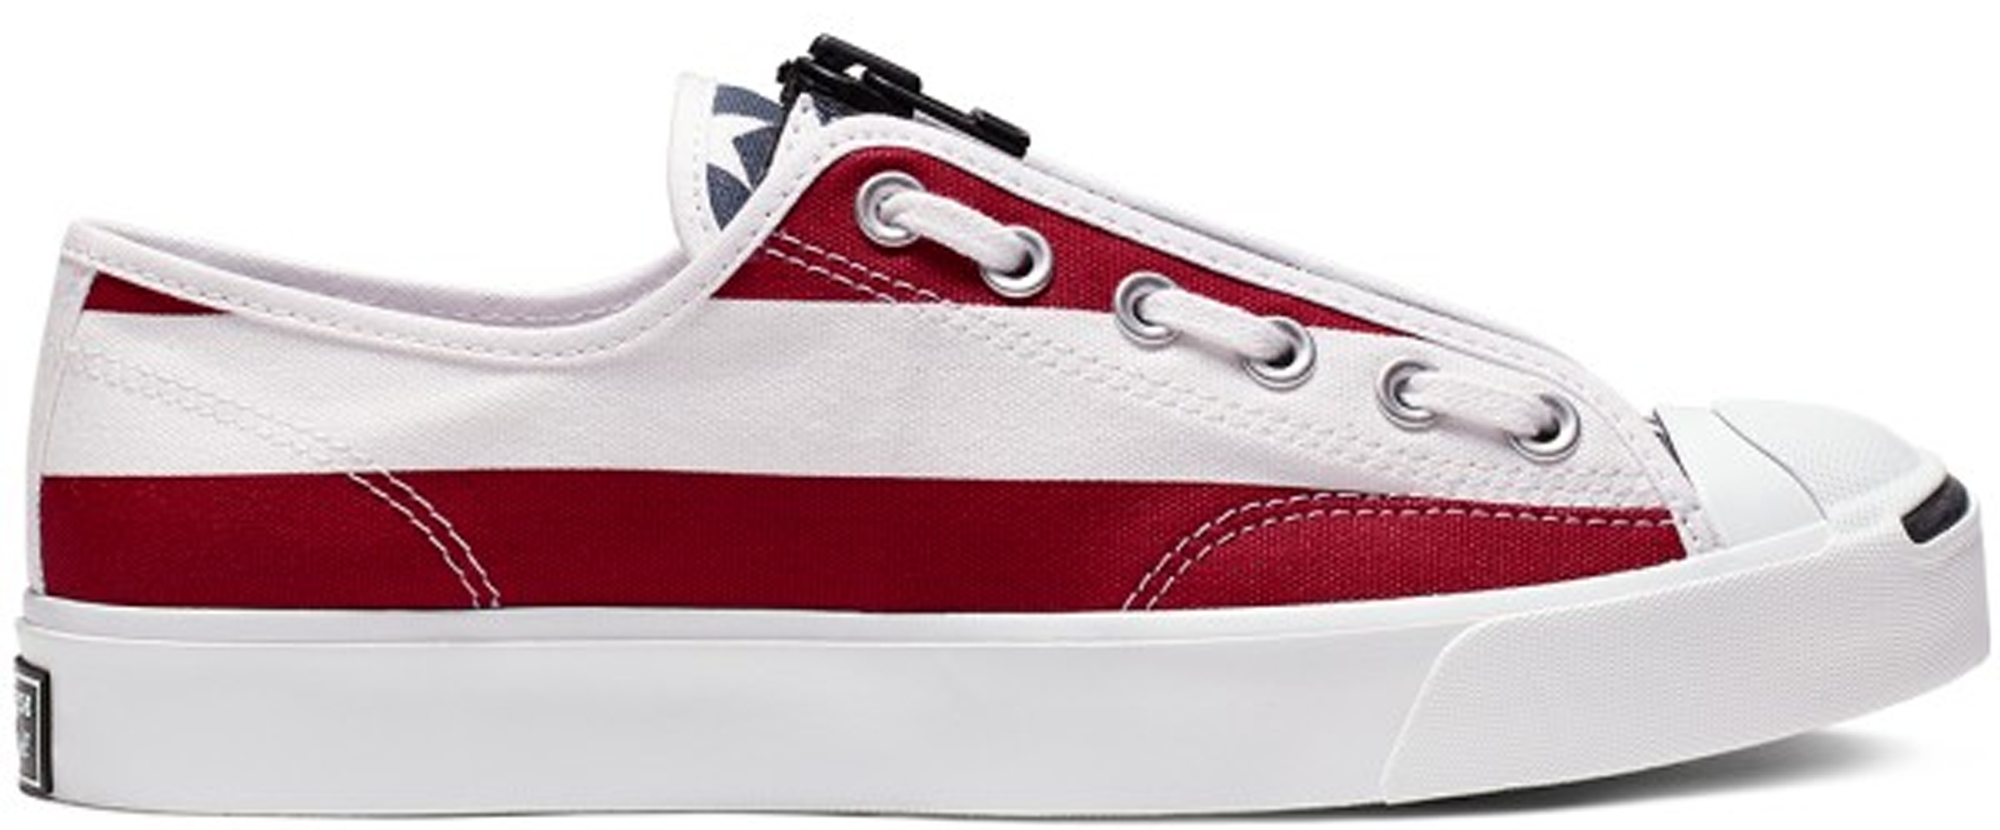 converse soloist jack purcell